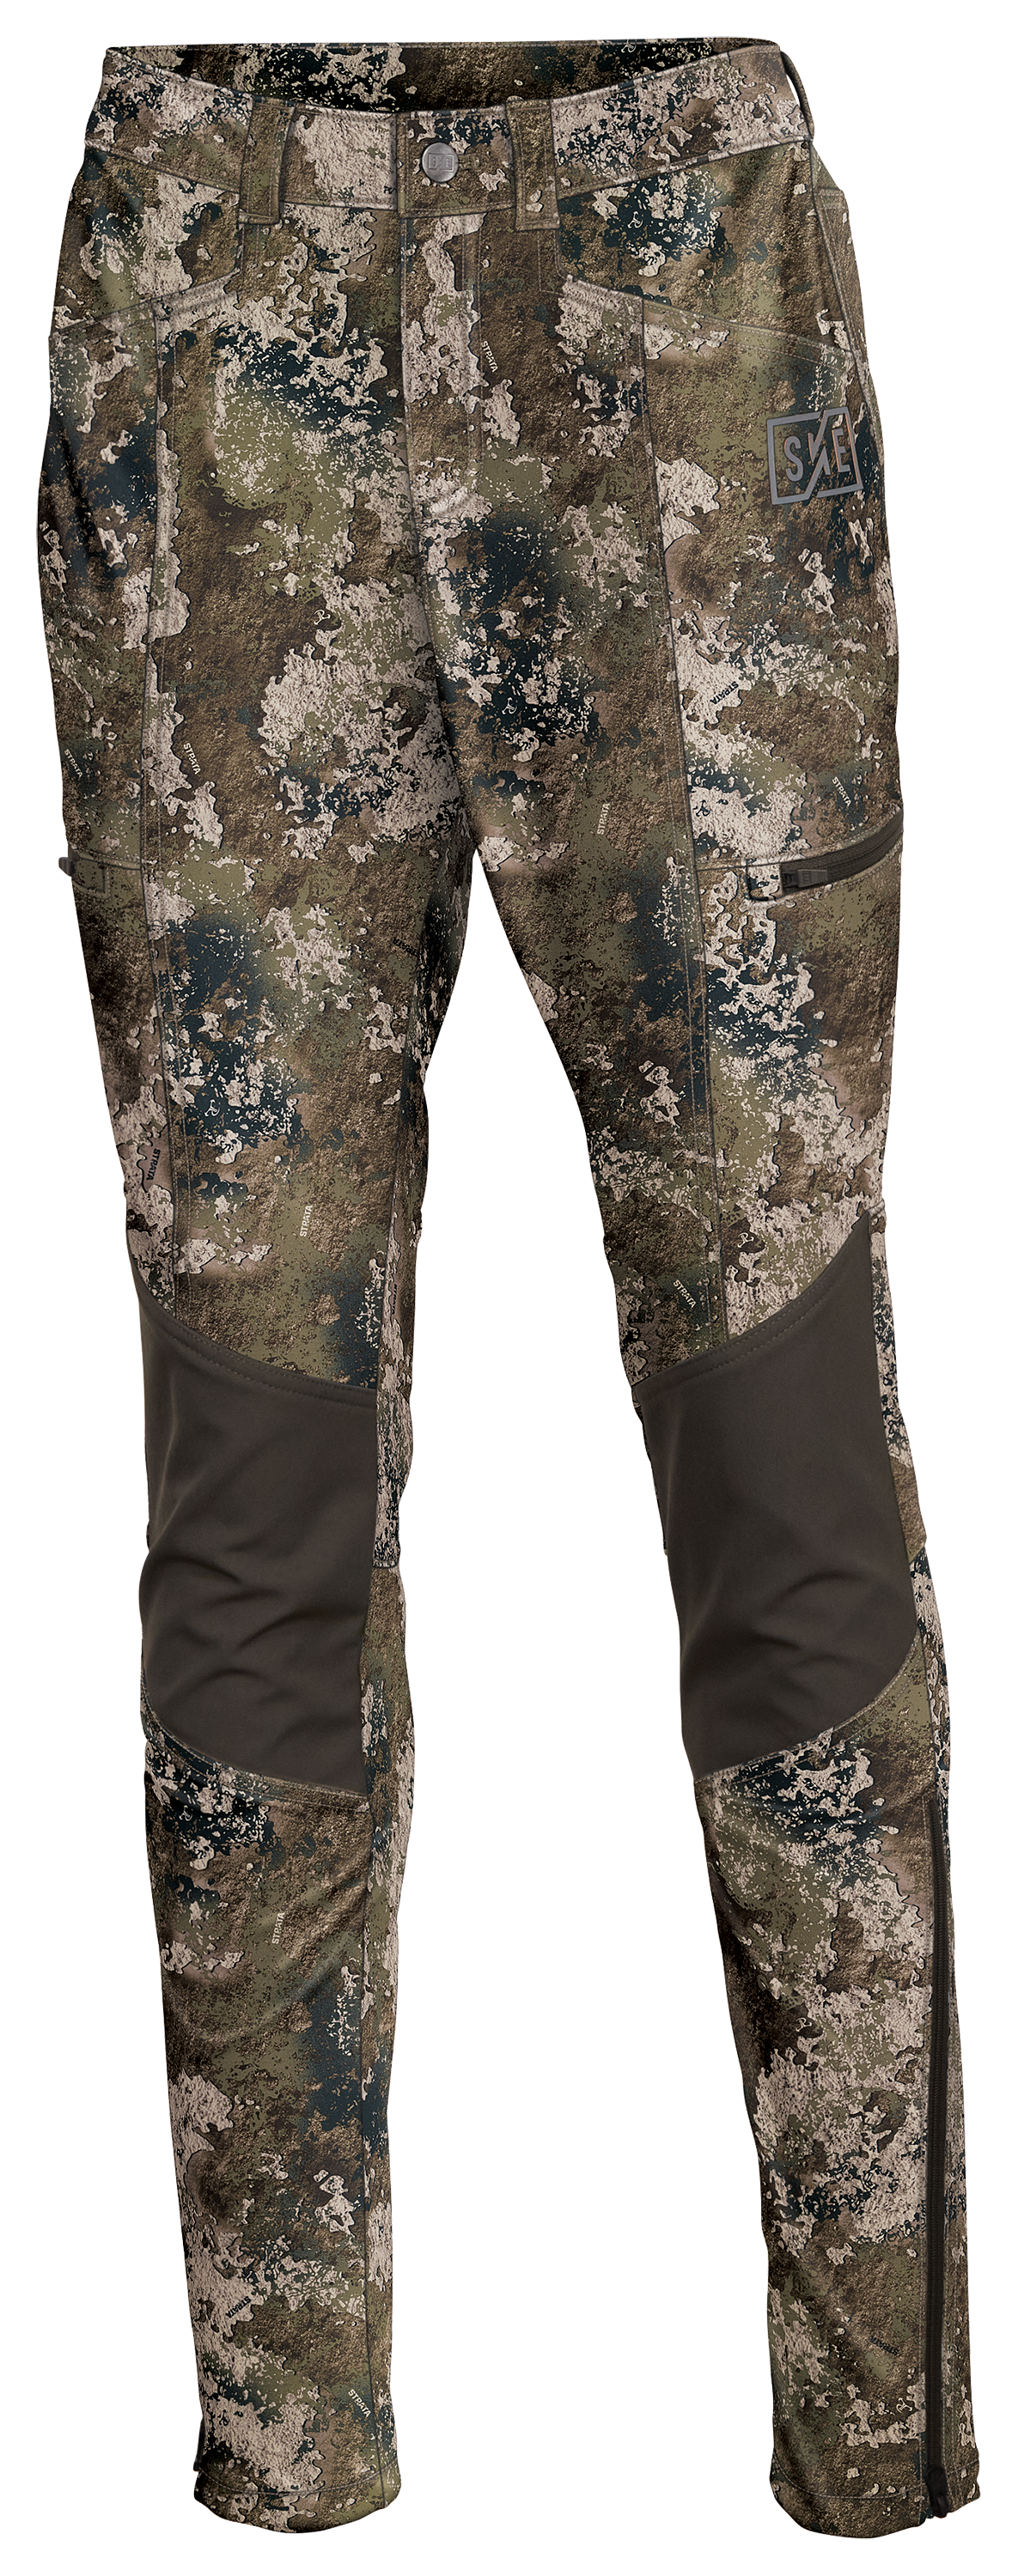 SHE Outdoor Insulated Waterproof Pants for Ladies